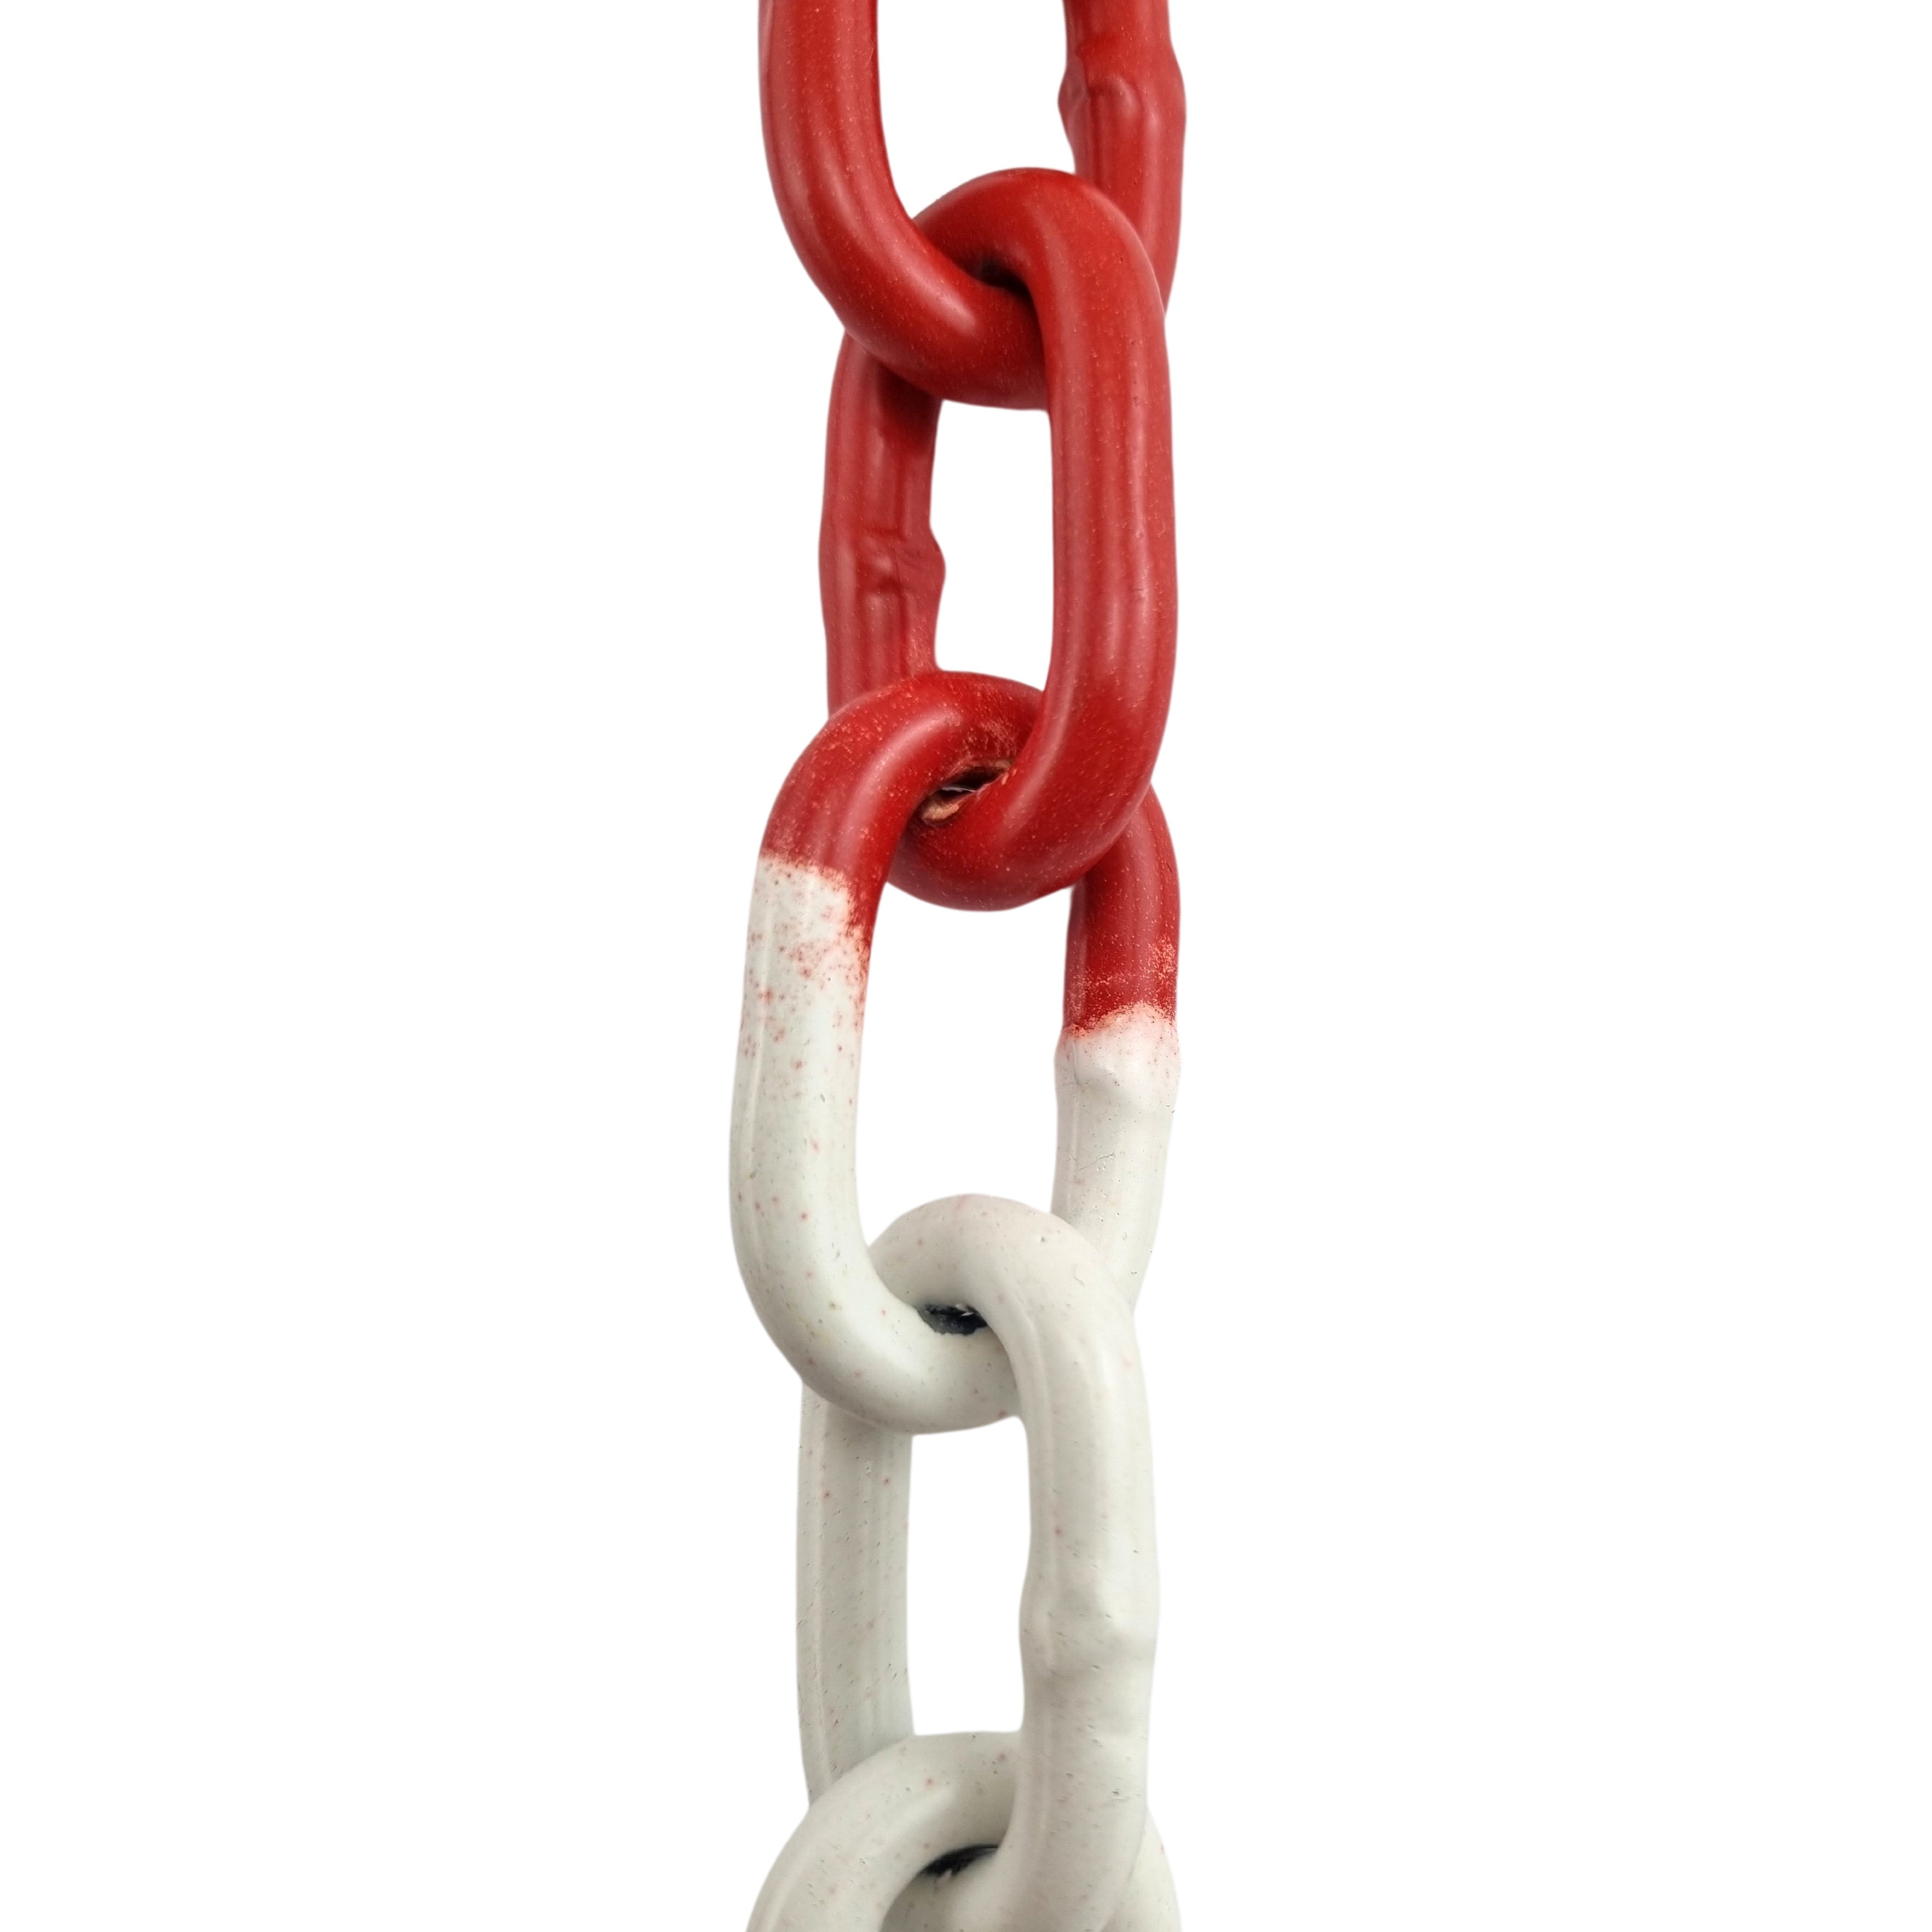 Red and white alternating powder-coated welded steel chain. Australia wide Shipping. Buy from 1m. Chain.com.au